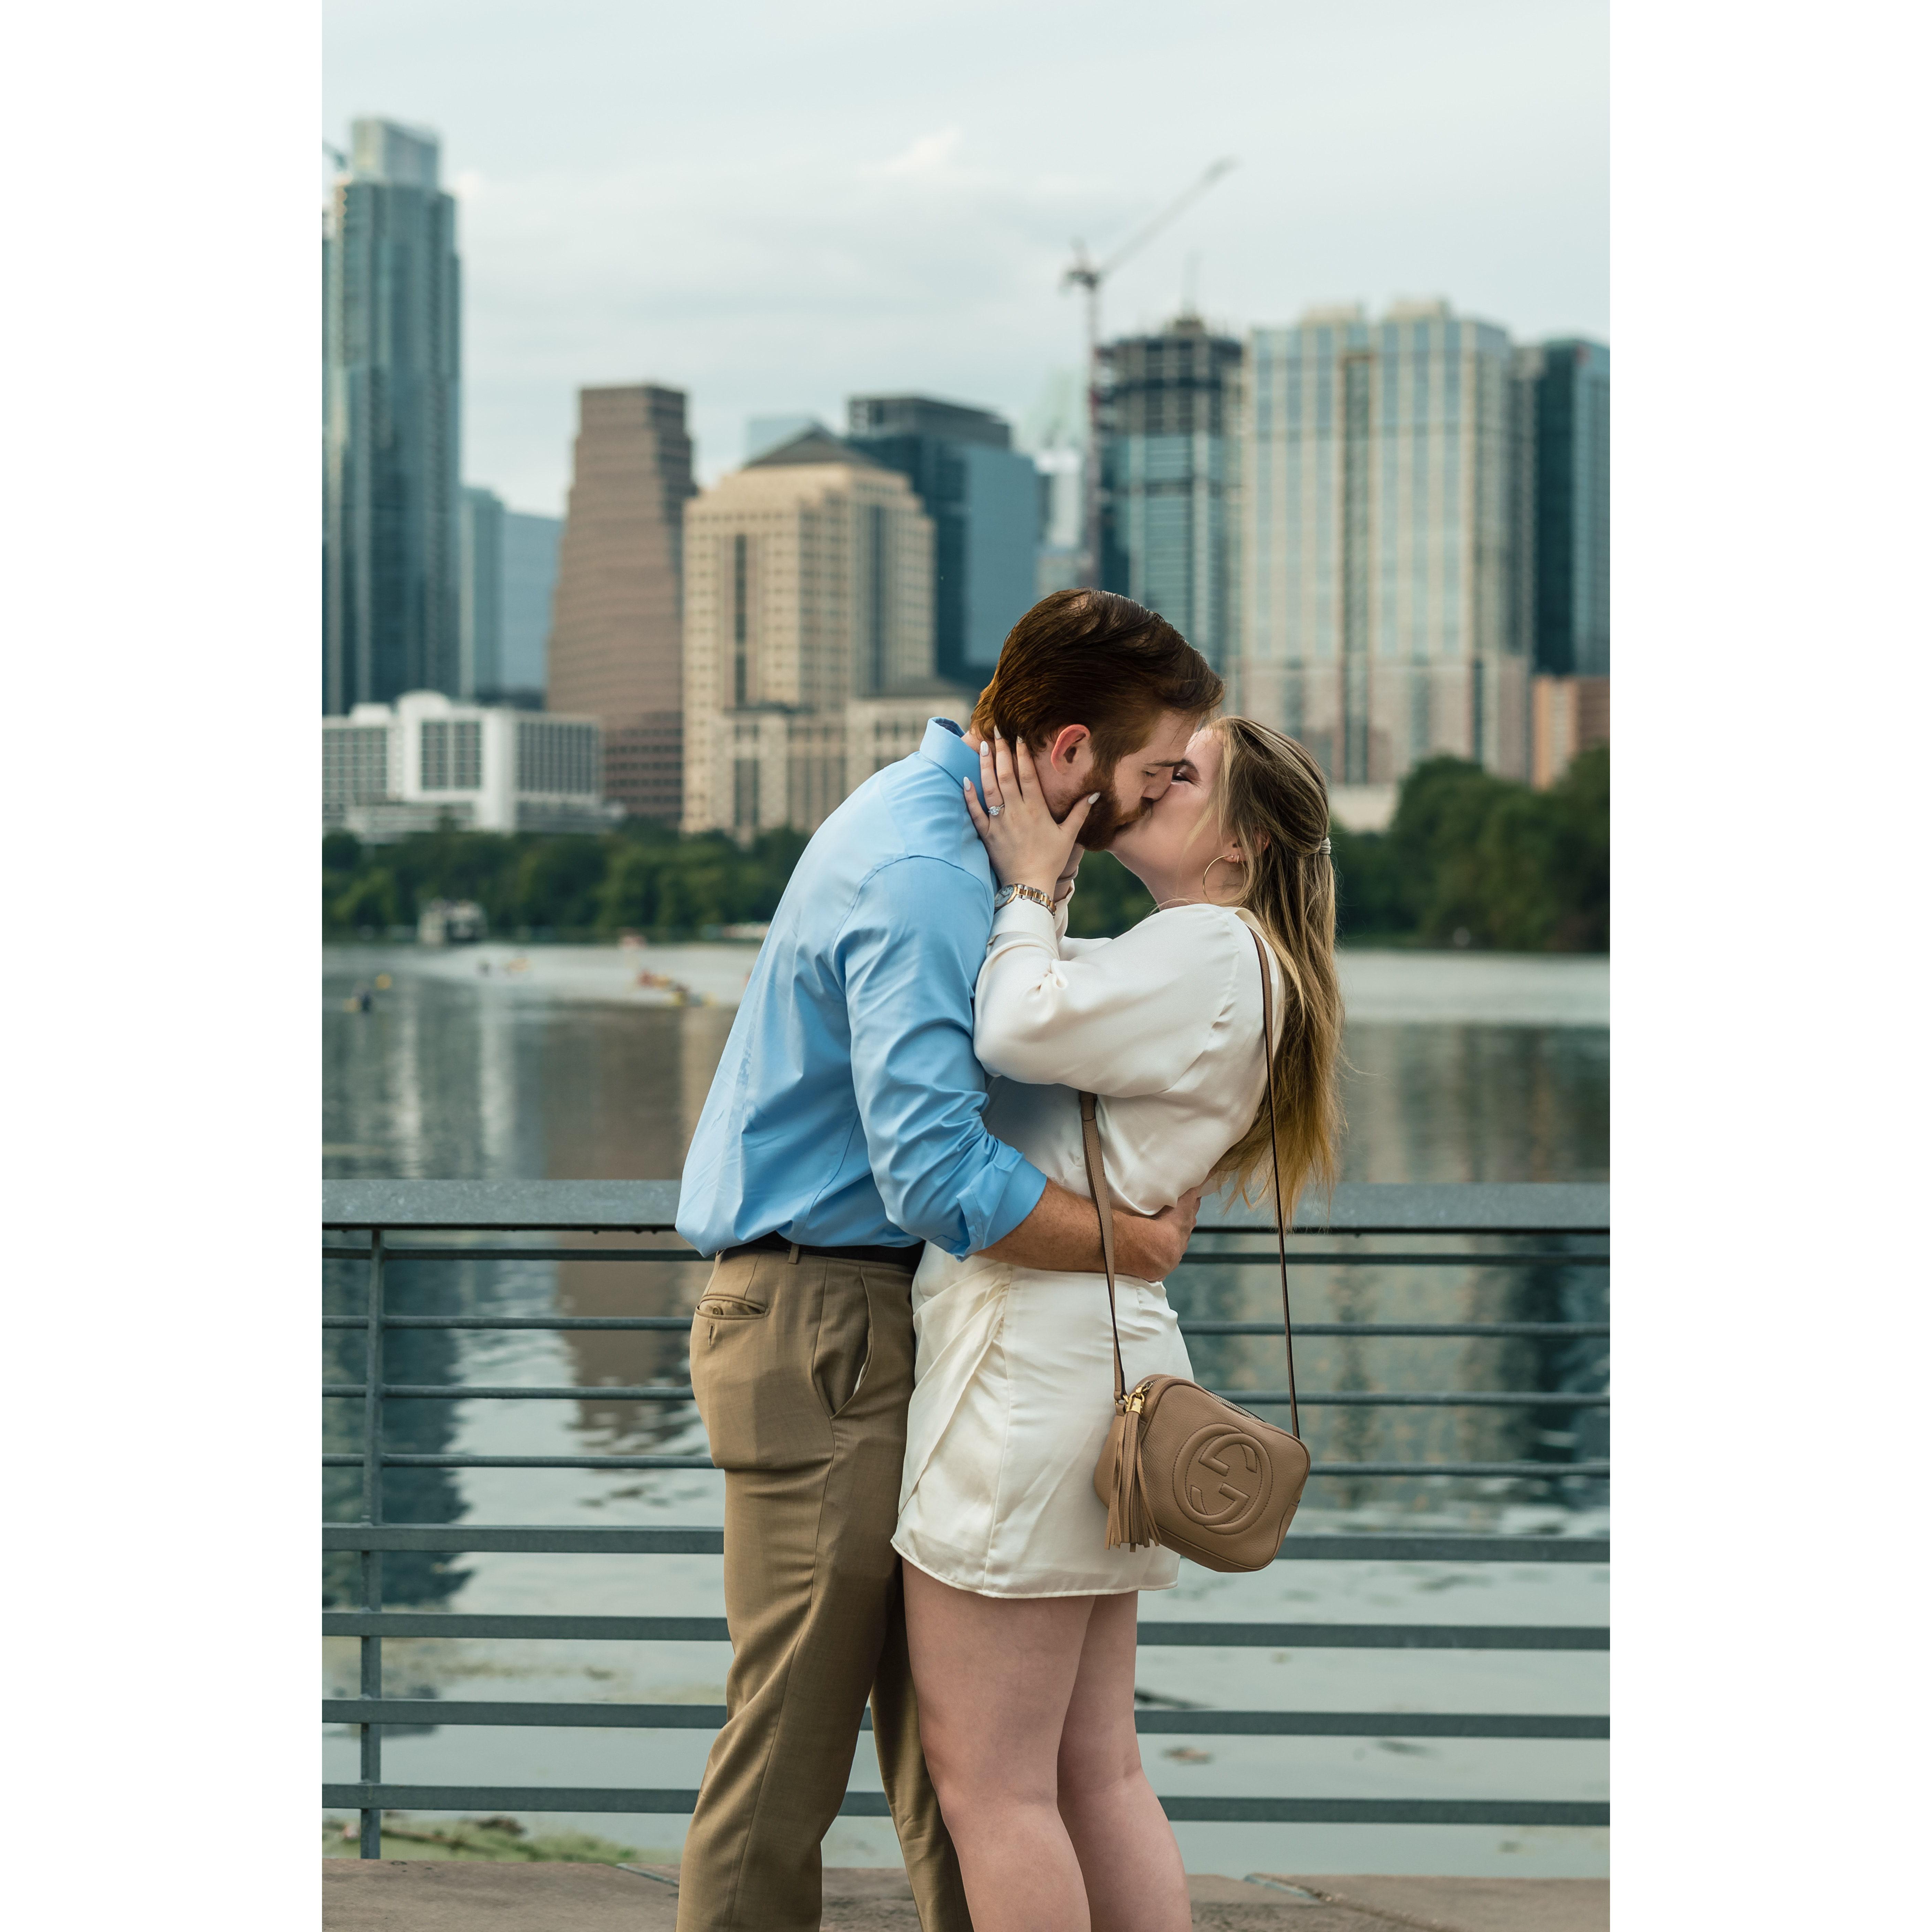 Parker proposed to Allie on the river walk over looking the Austin skyline.